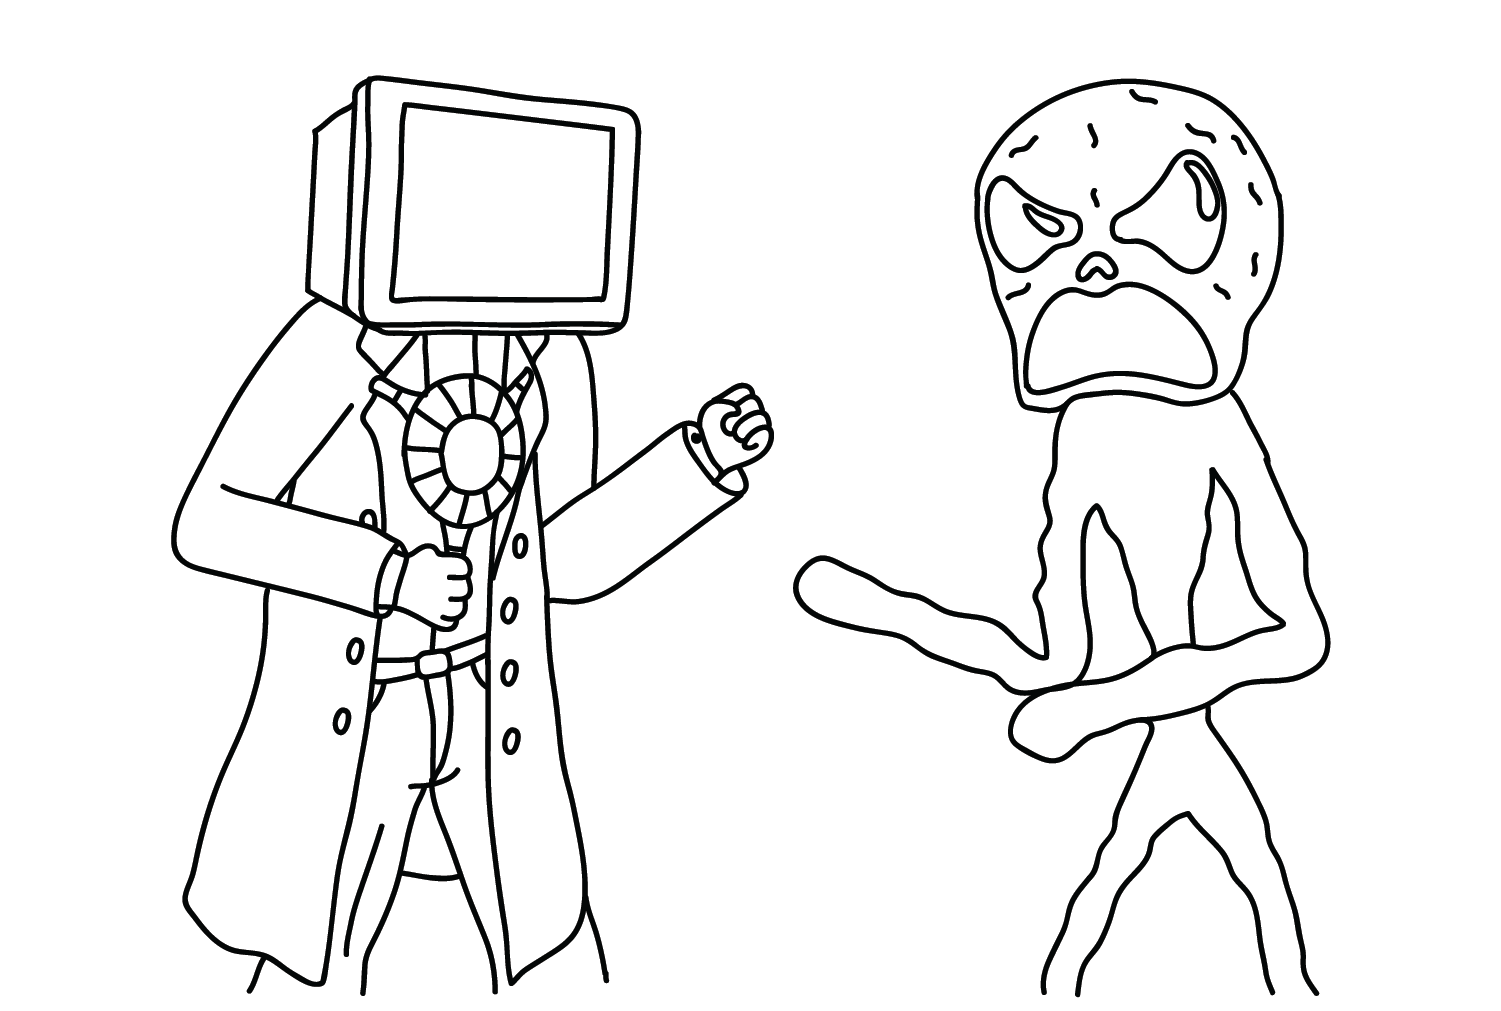 TV Man Coloring Pages to Print from TV Man